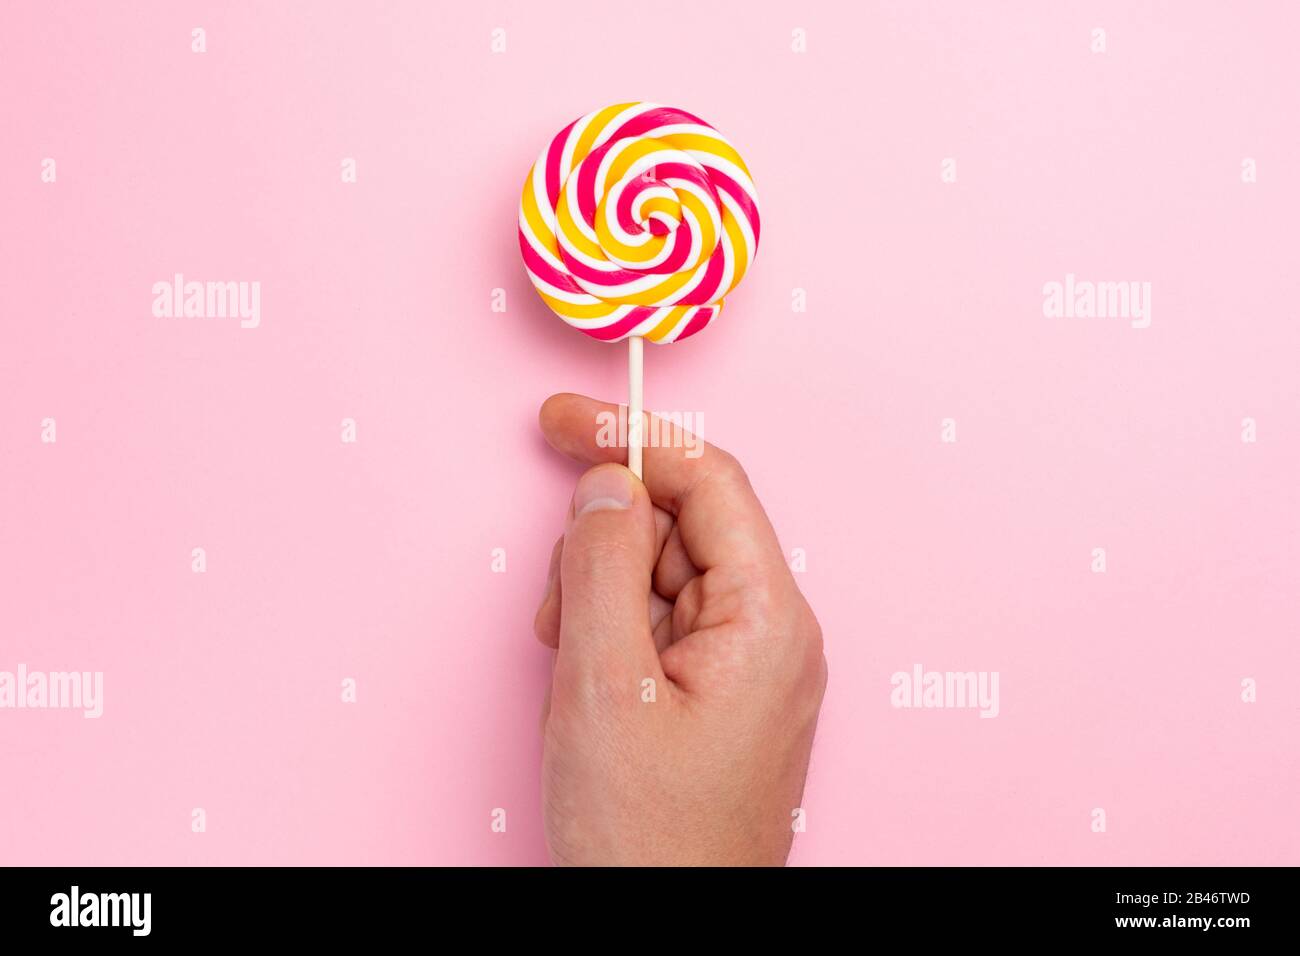 Colorful lolipop in hand , pink, yellow and white spiral on pink ...